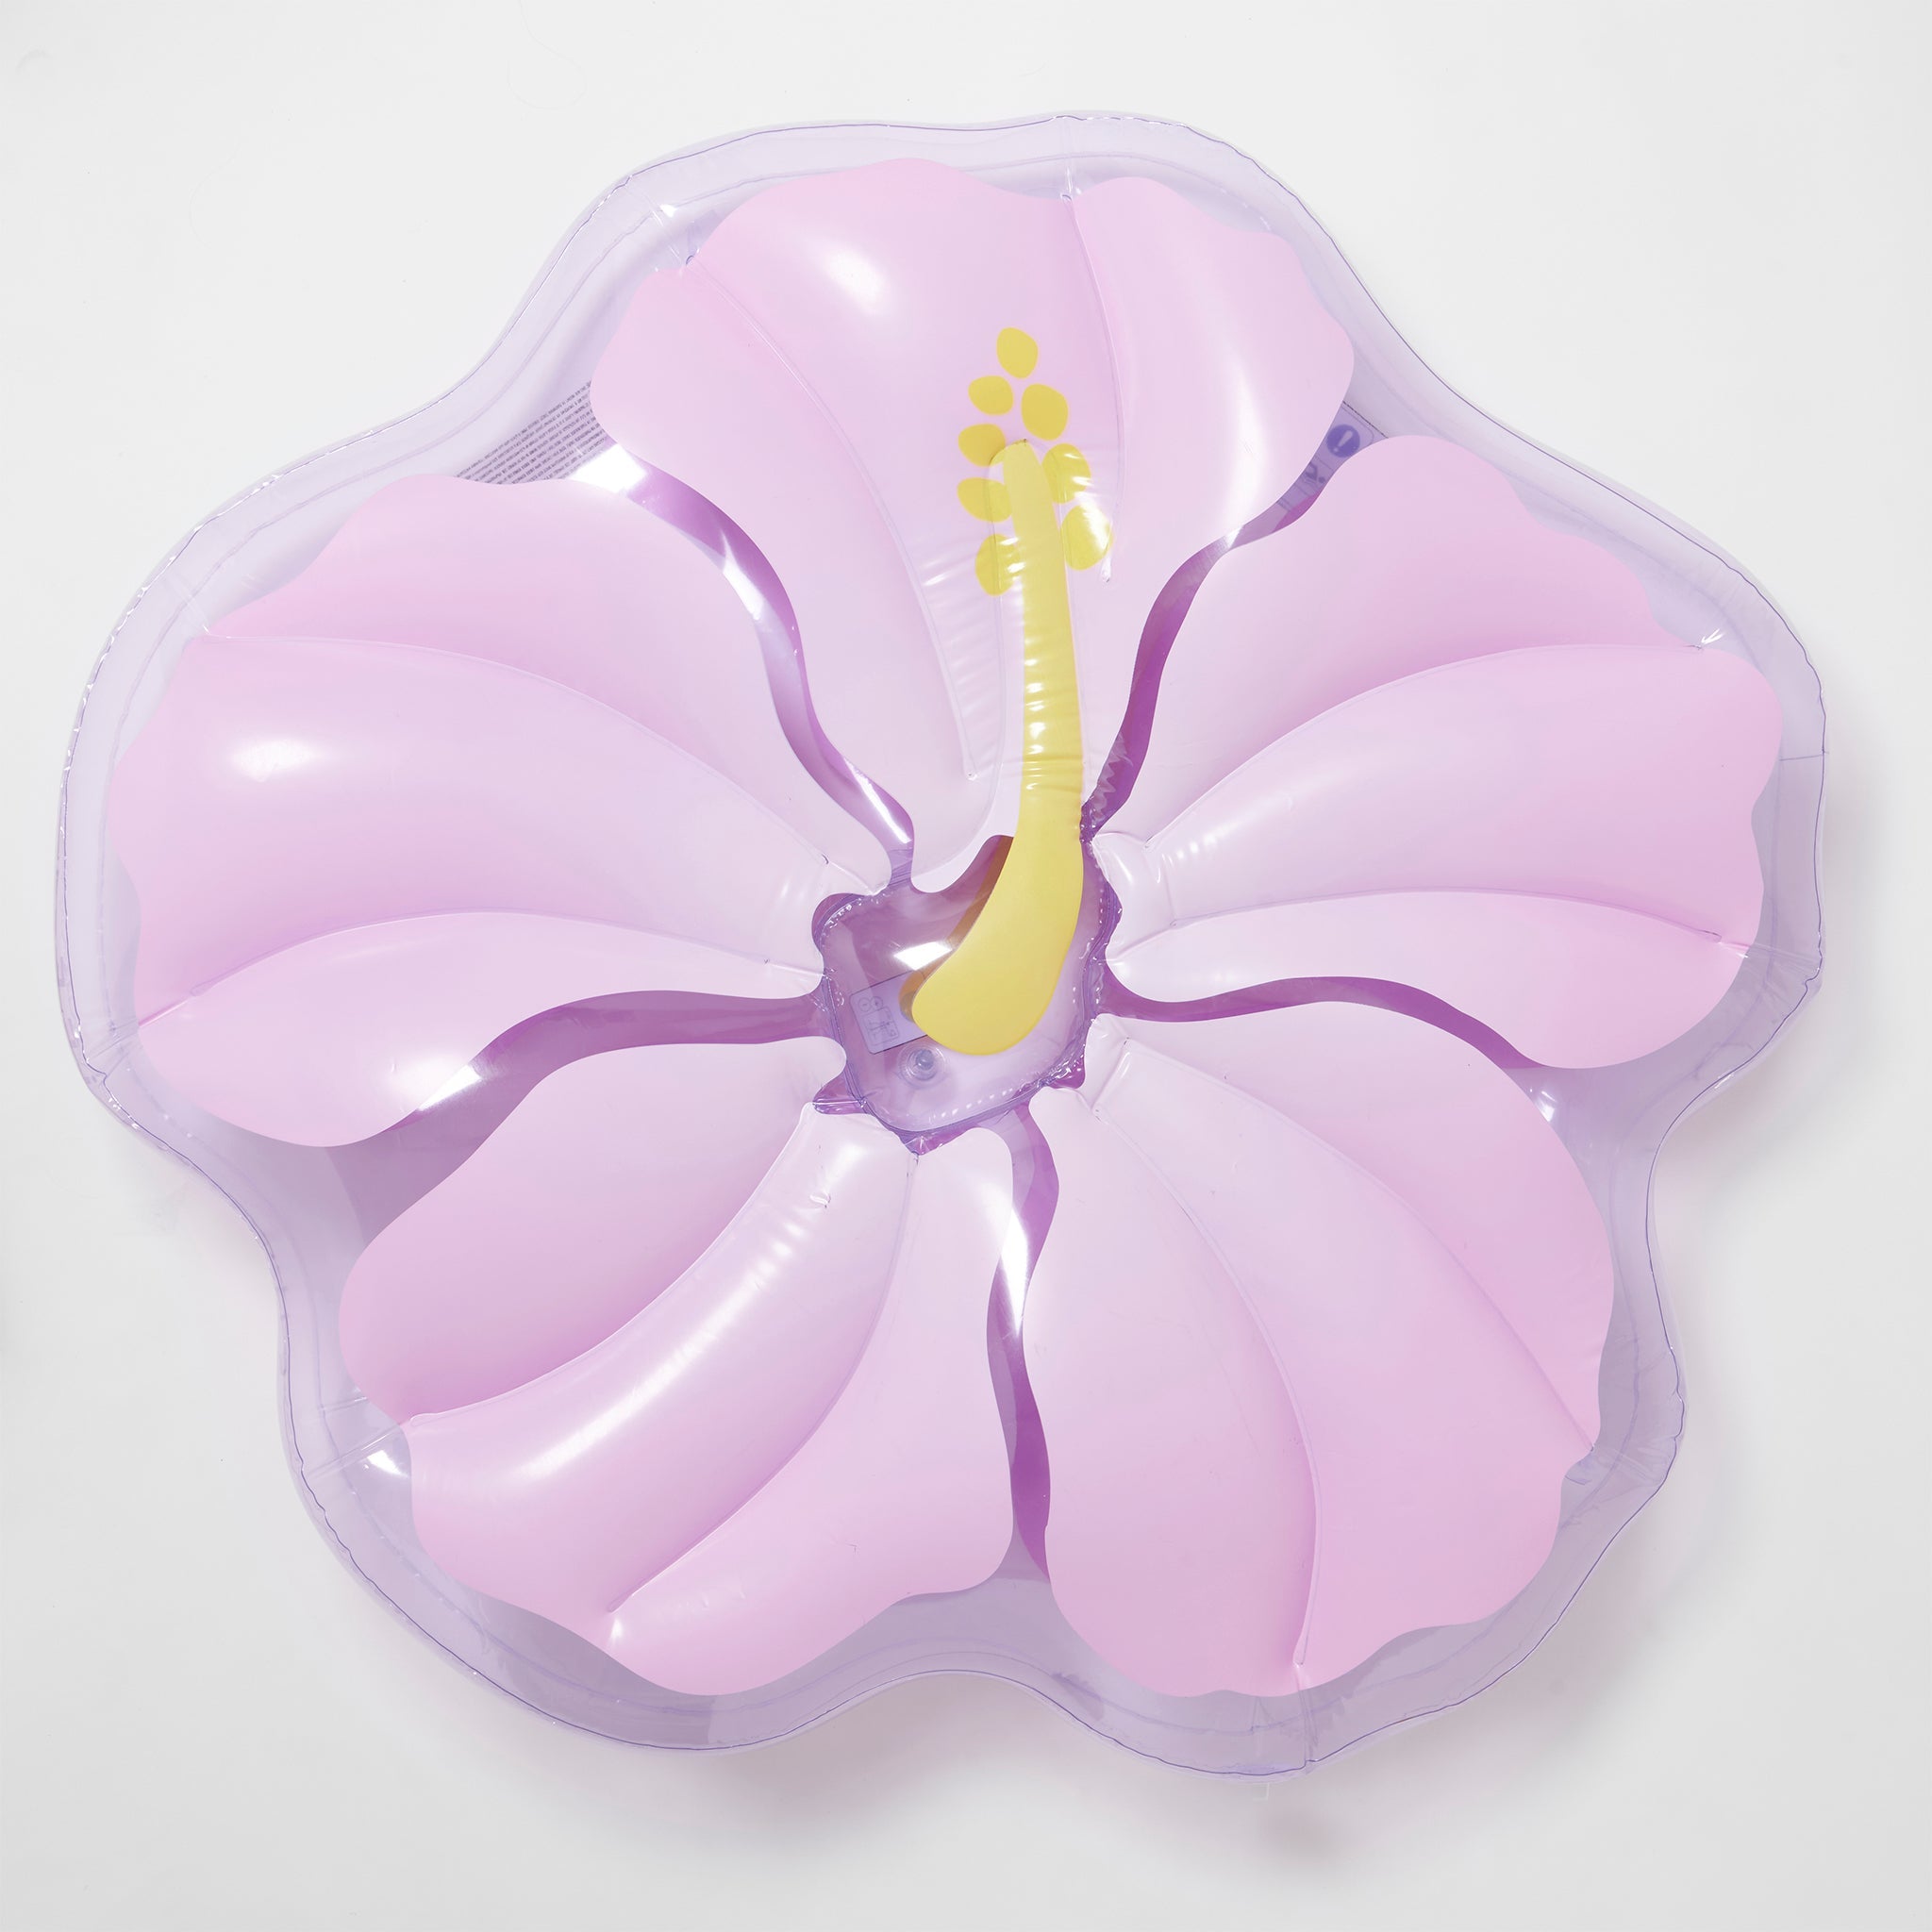 Luxe Lie-On Float | Hibiscus Pastel Lilac